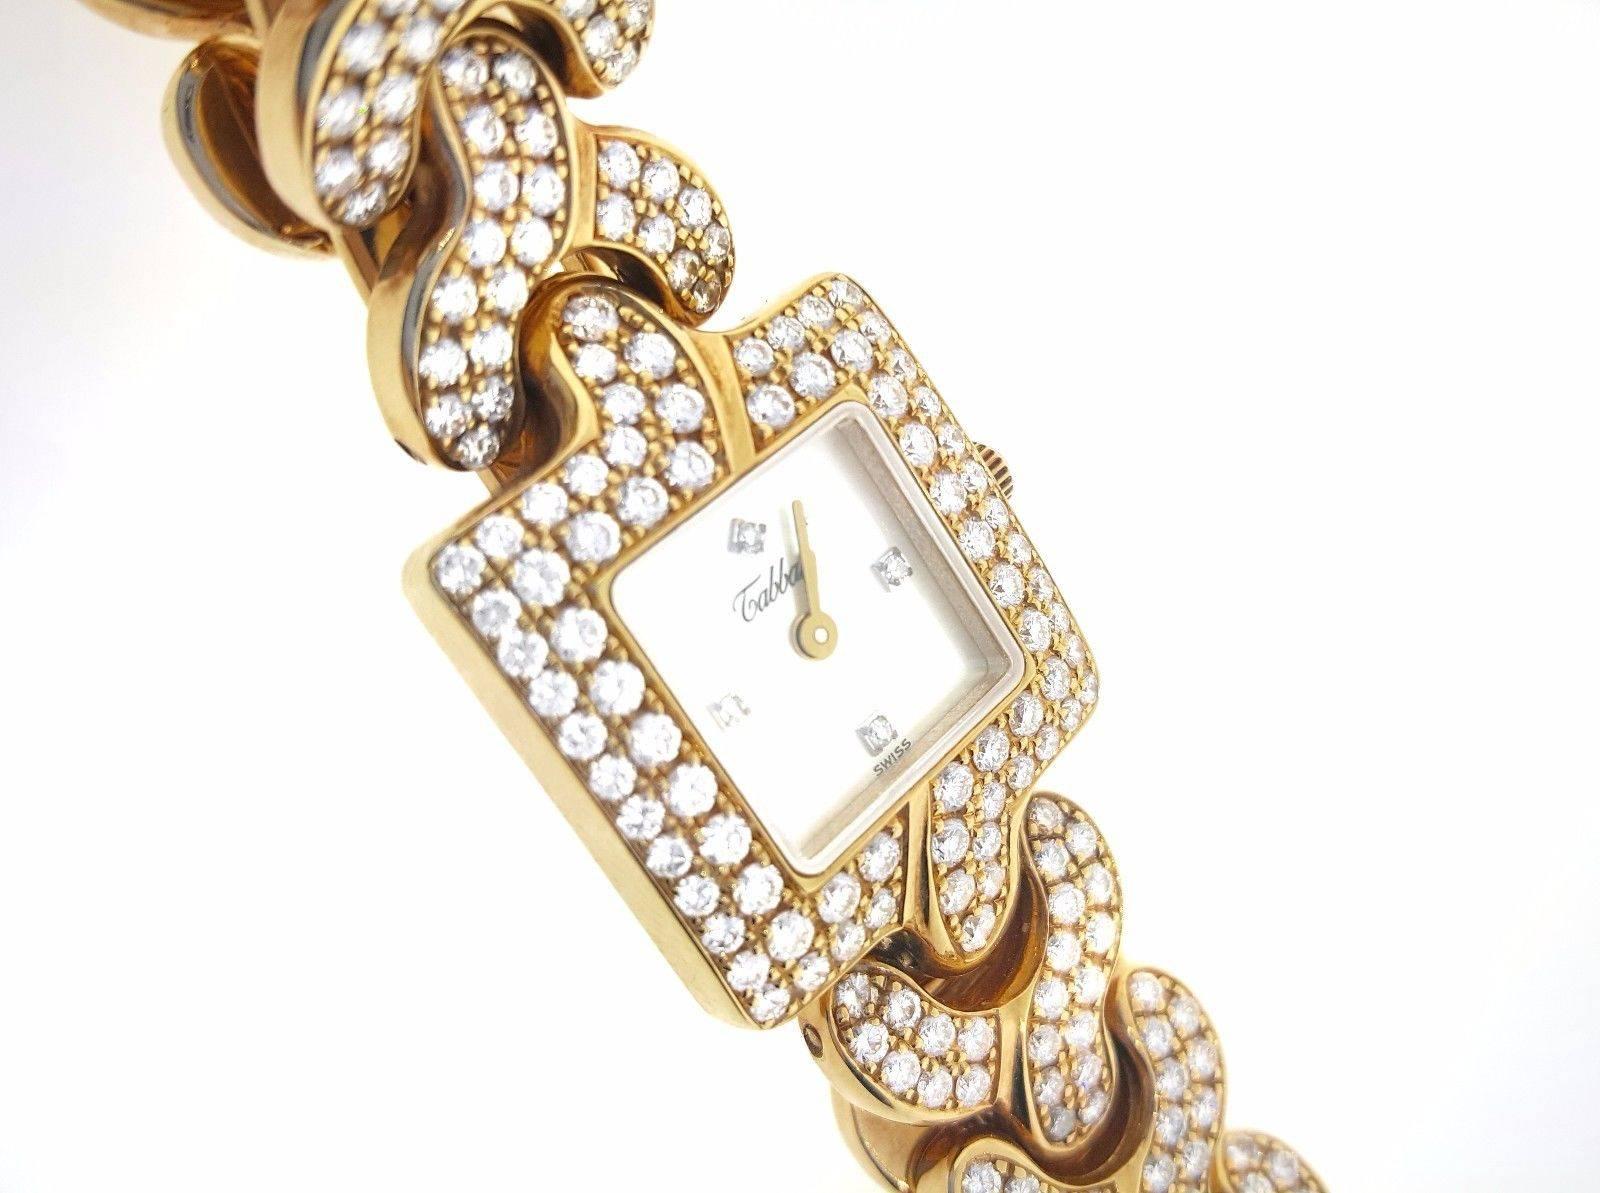 Ladies diamond dress watch with square mother of Pearl face in 18k yellow gold by Tabbah, featuring square dial made of mother of pearl with 4 diamond markers.  Watch has a wide pave diamond bezel and diamond link band. 
 Diamonds are on all but 6